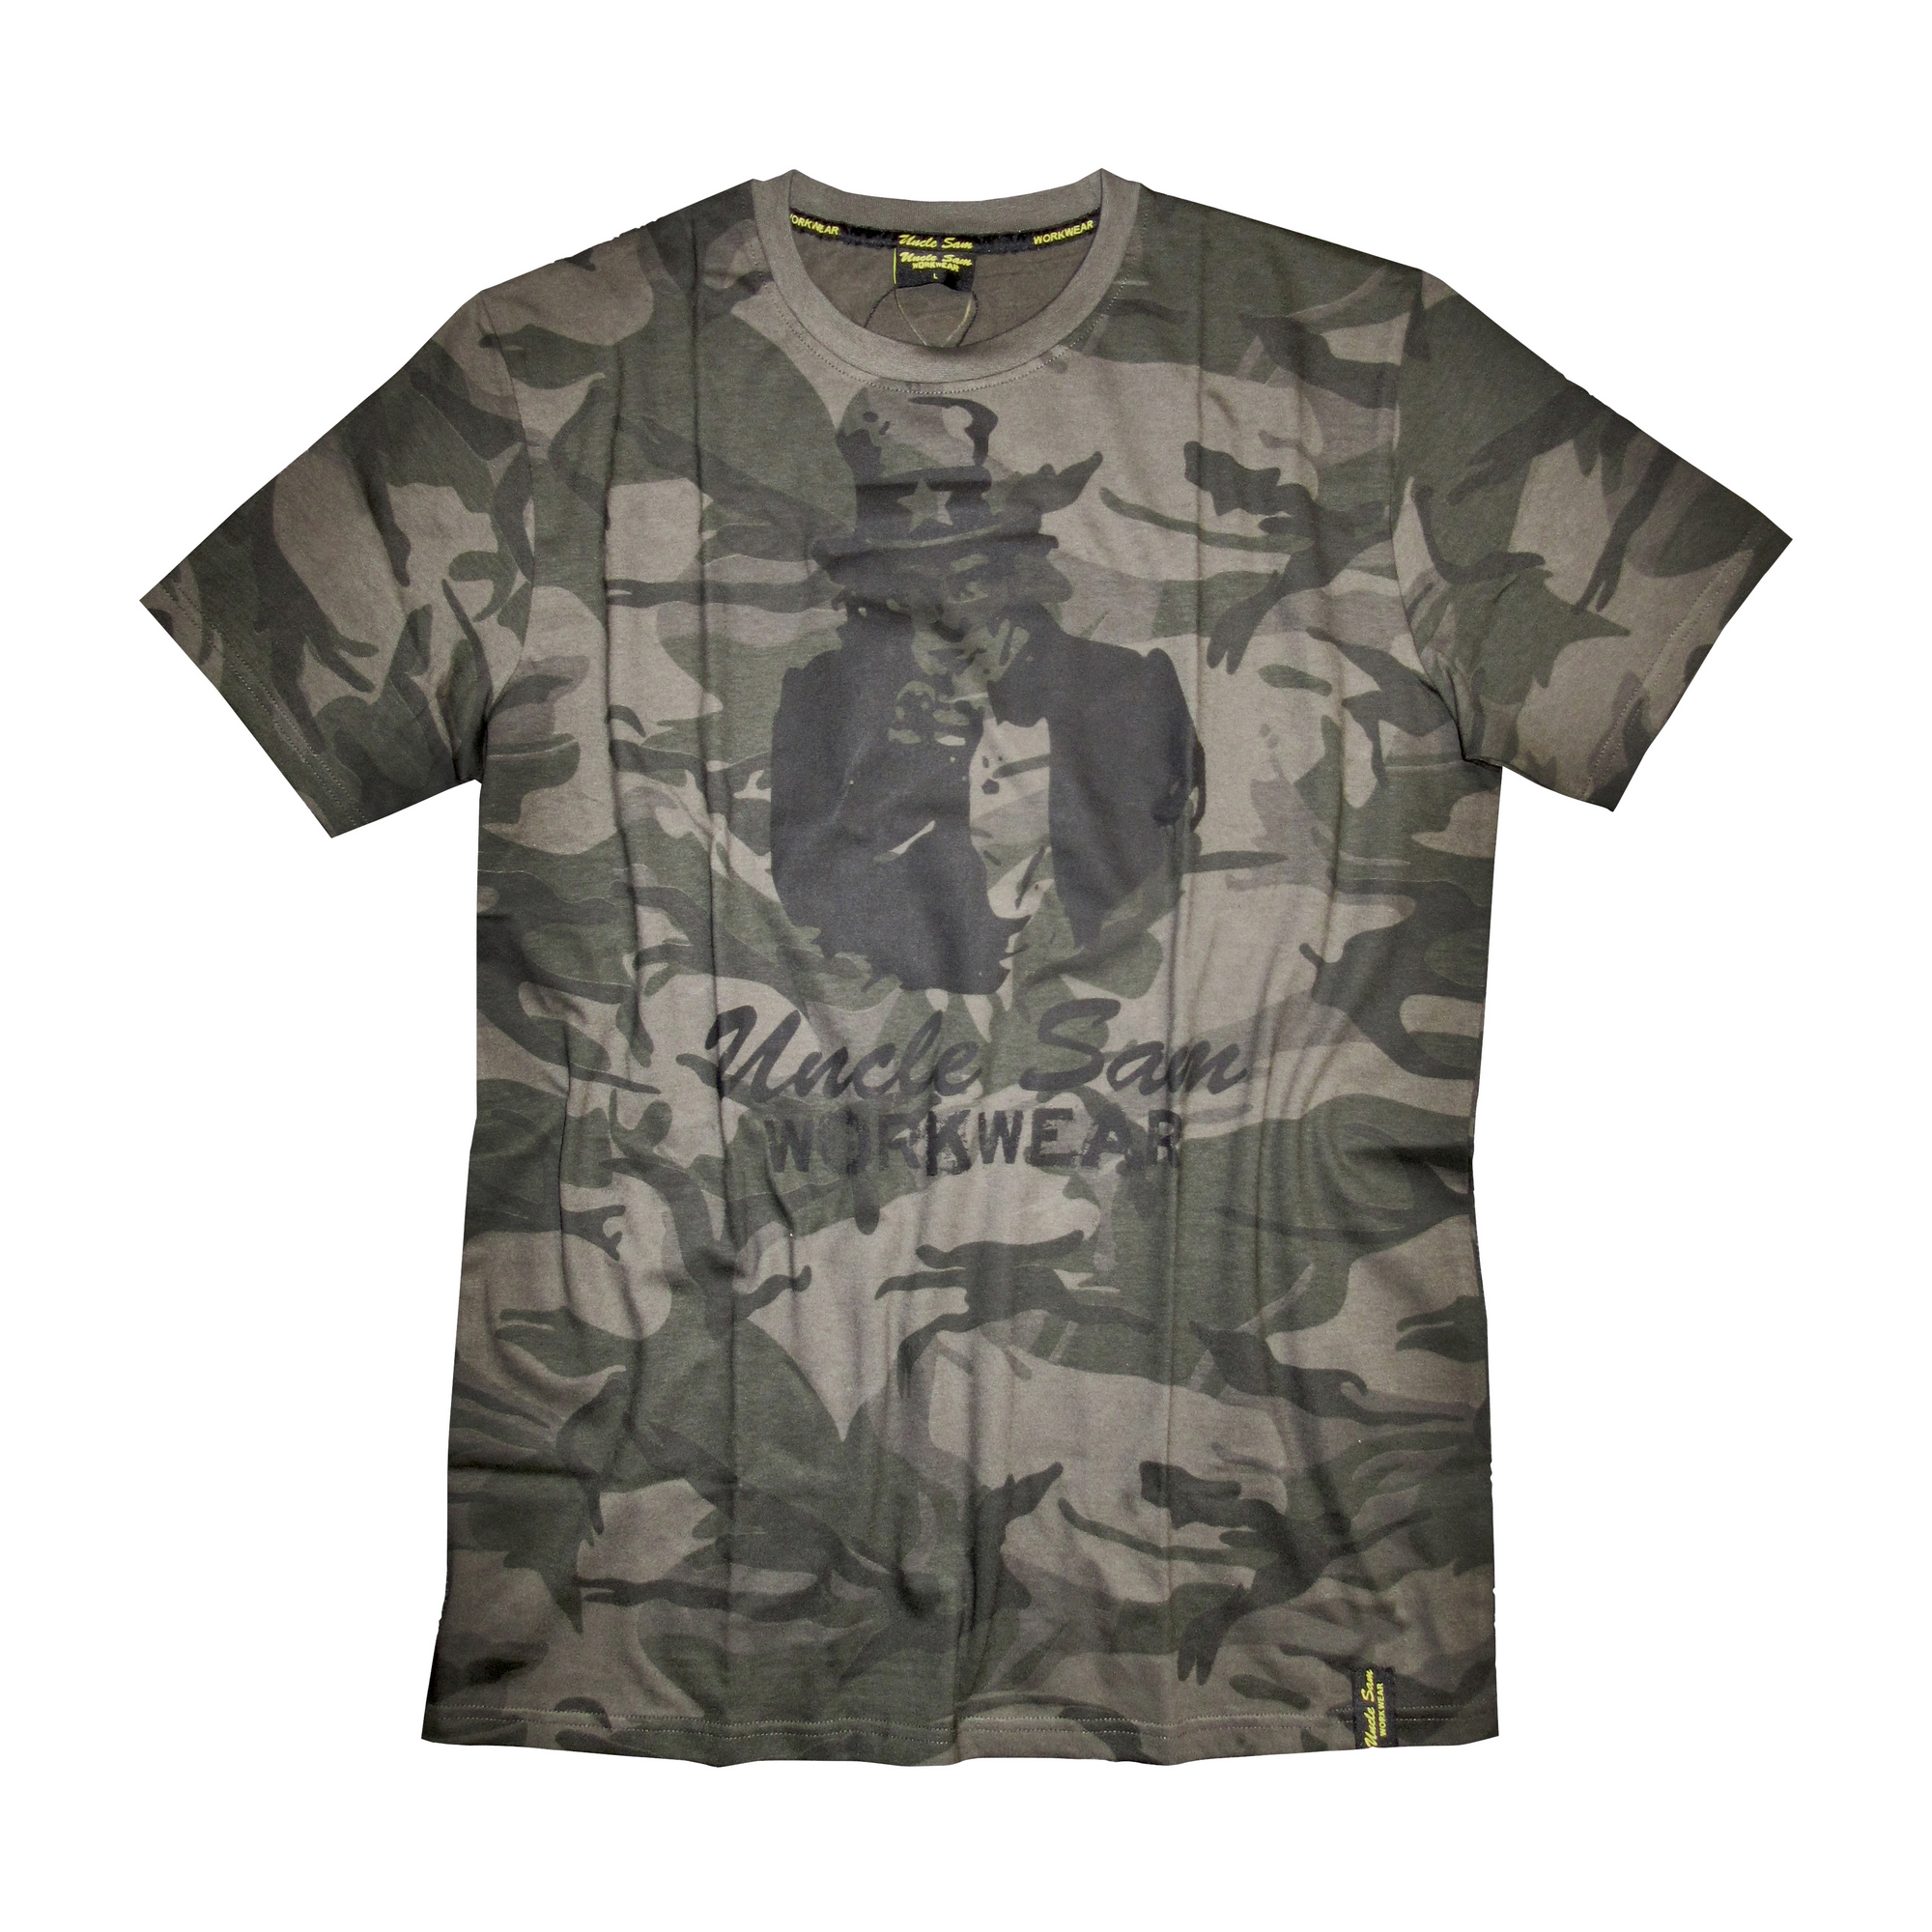 T-Shirt 'Workwear' olive/camouflage M, Baumwolle + product picture